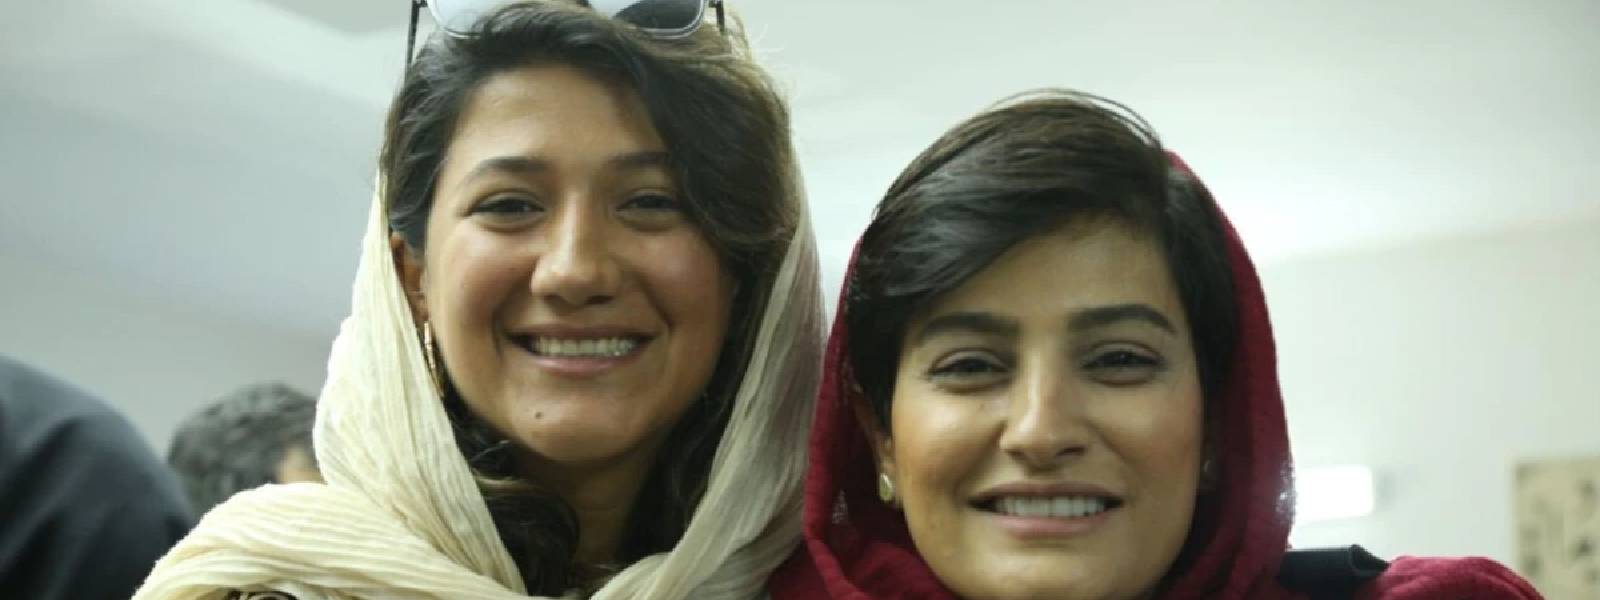 Iran arrests 55 journalists since start of protests, including 16 women